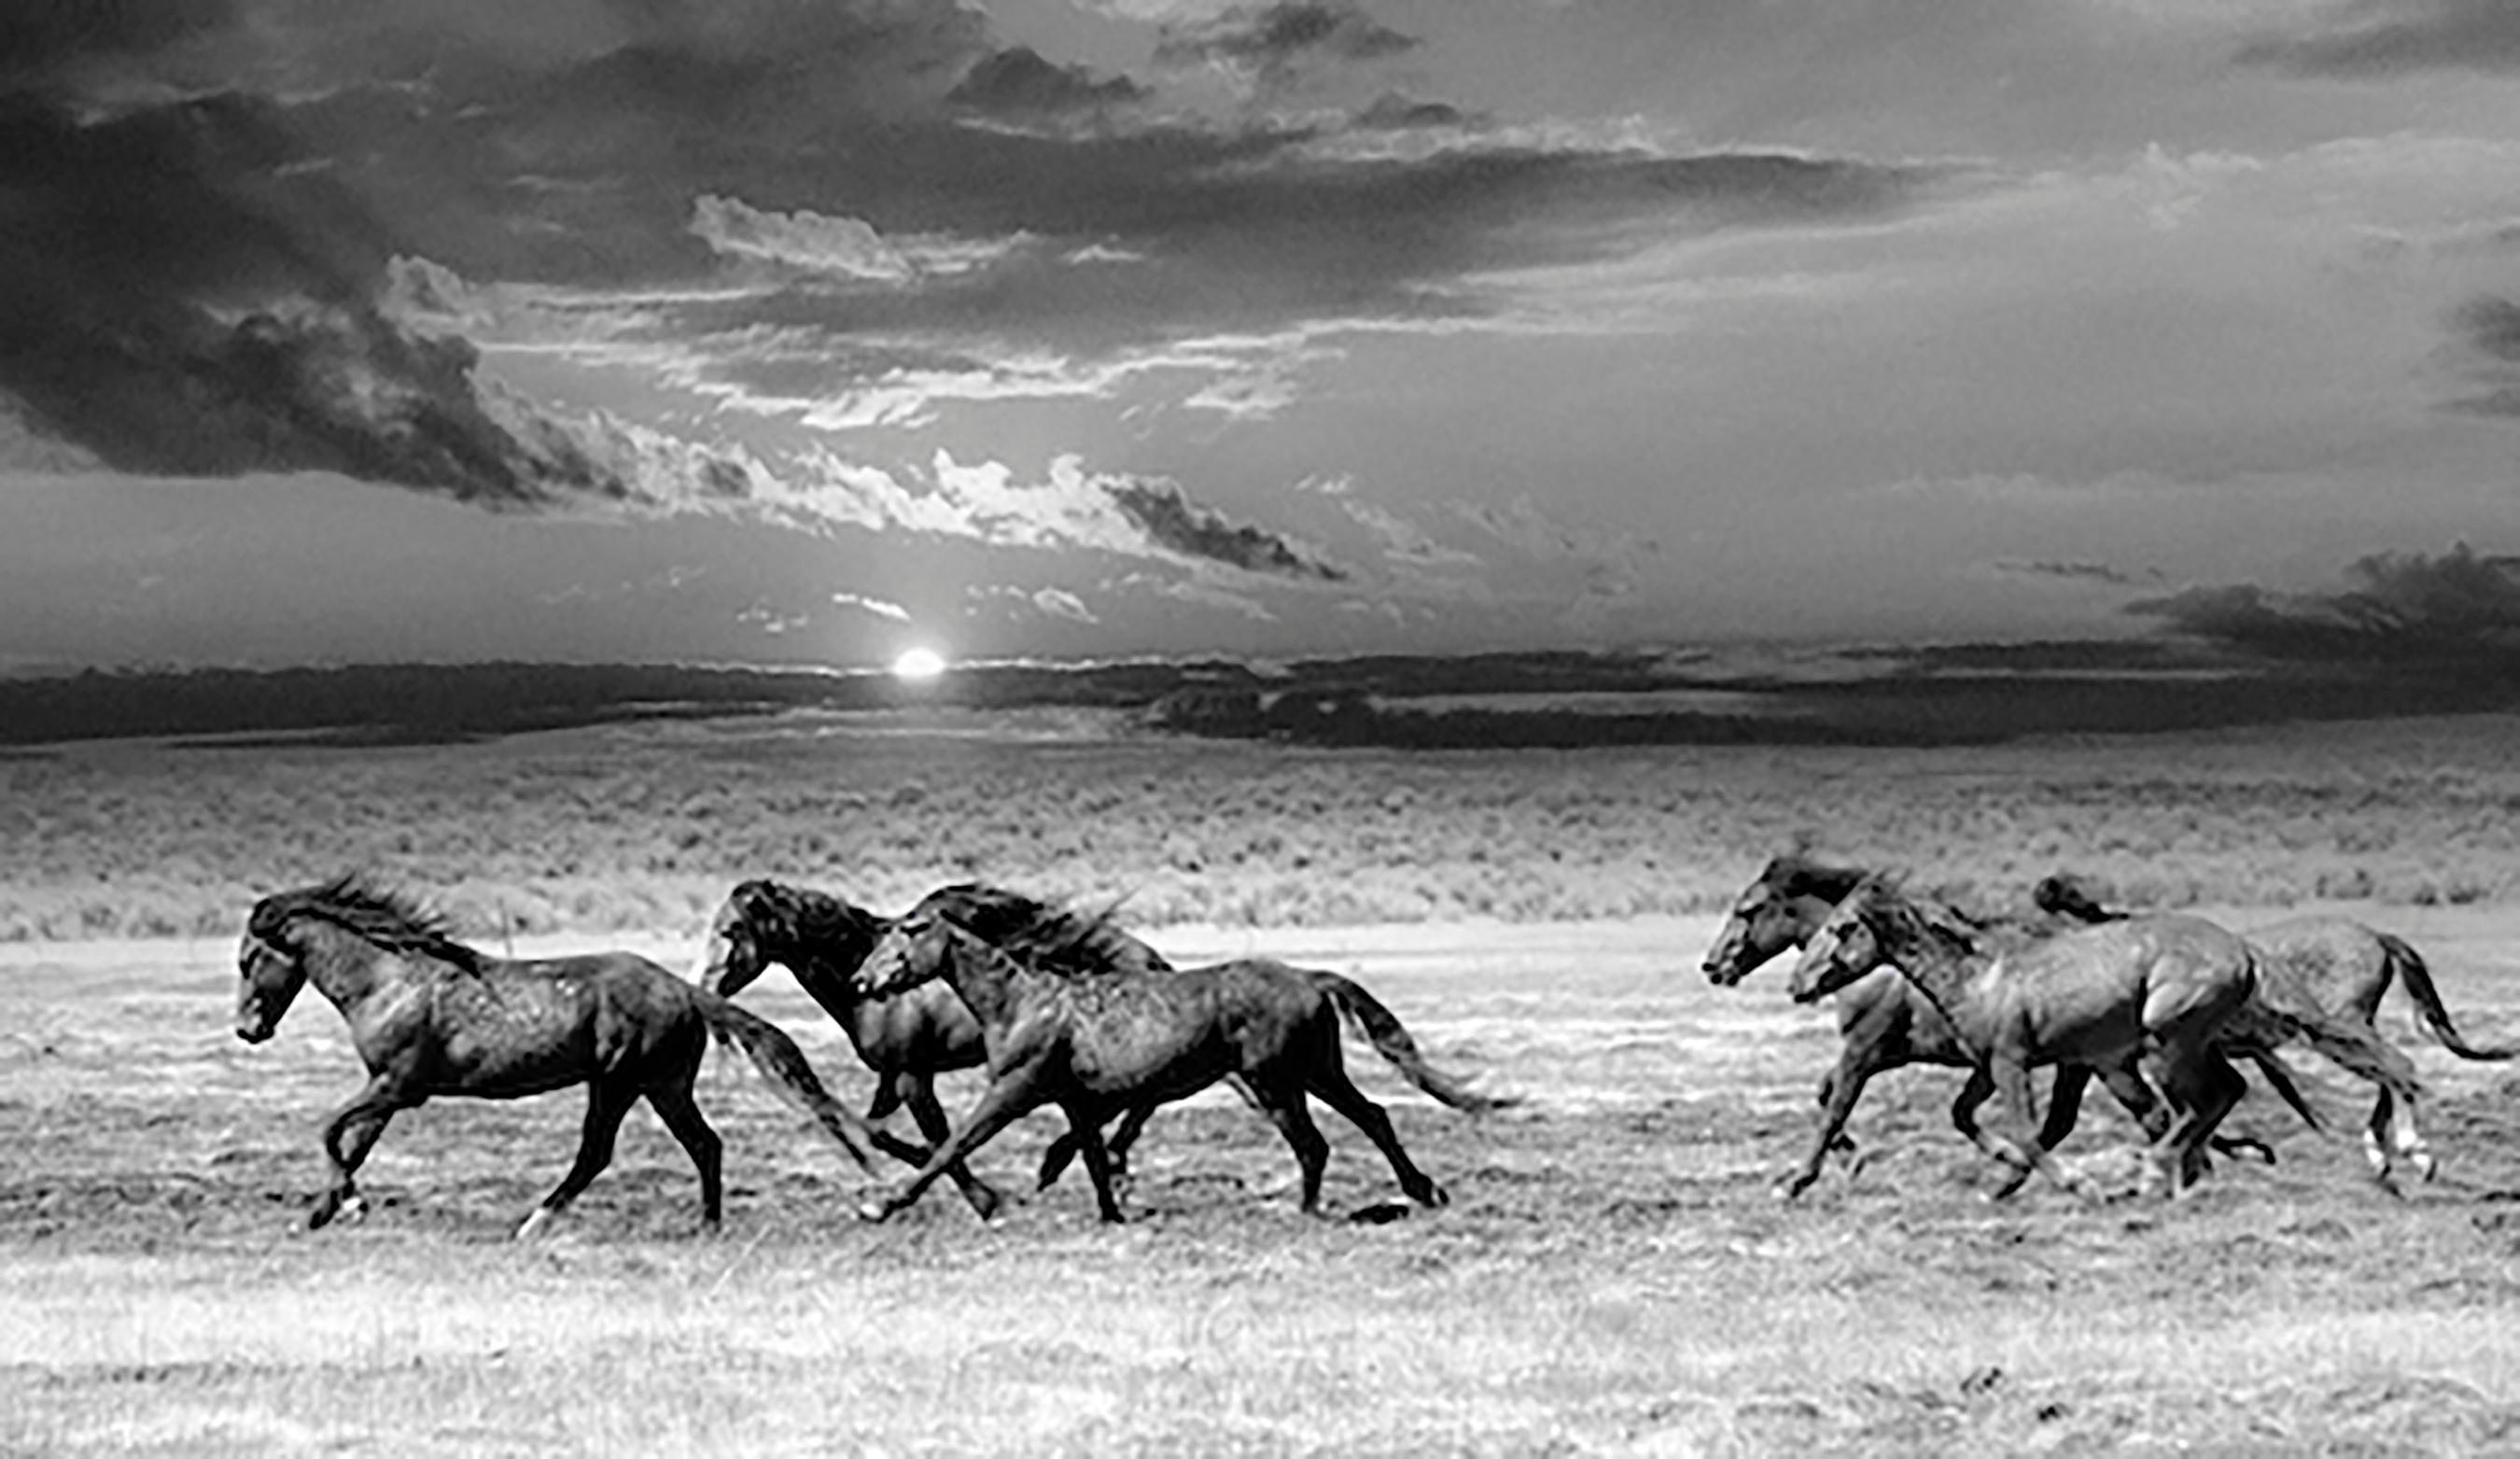 Chasing the Light - Contemporary Black and White Photography of Wild Horses 2